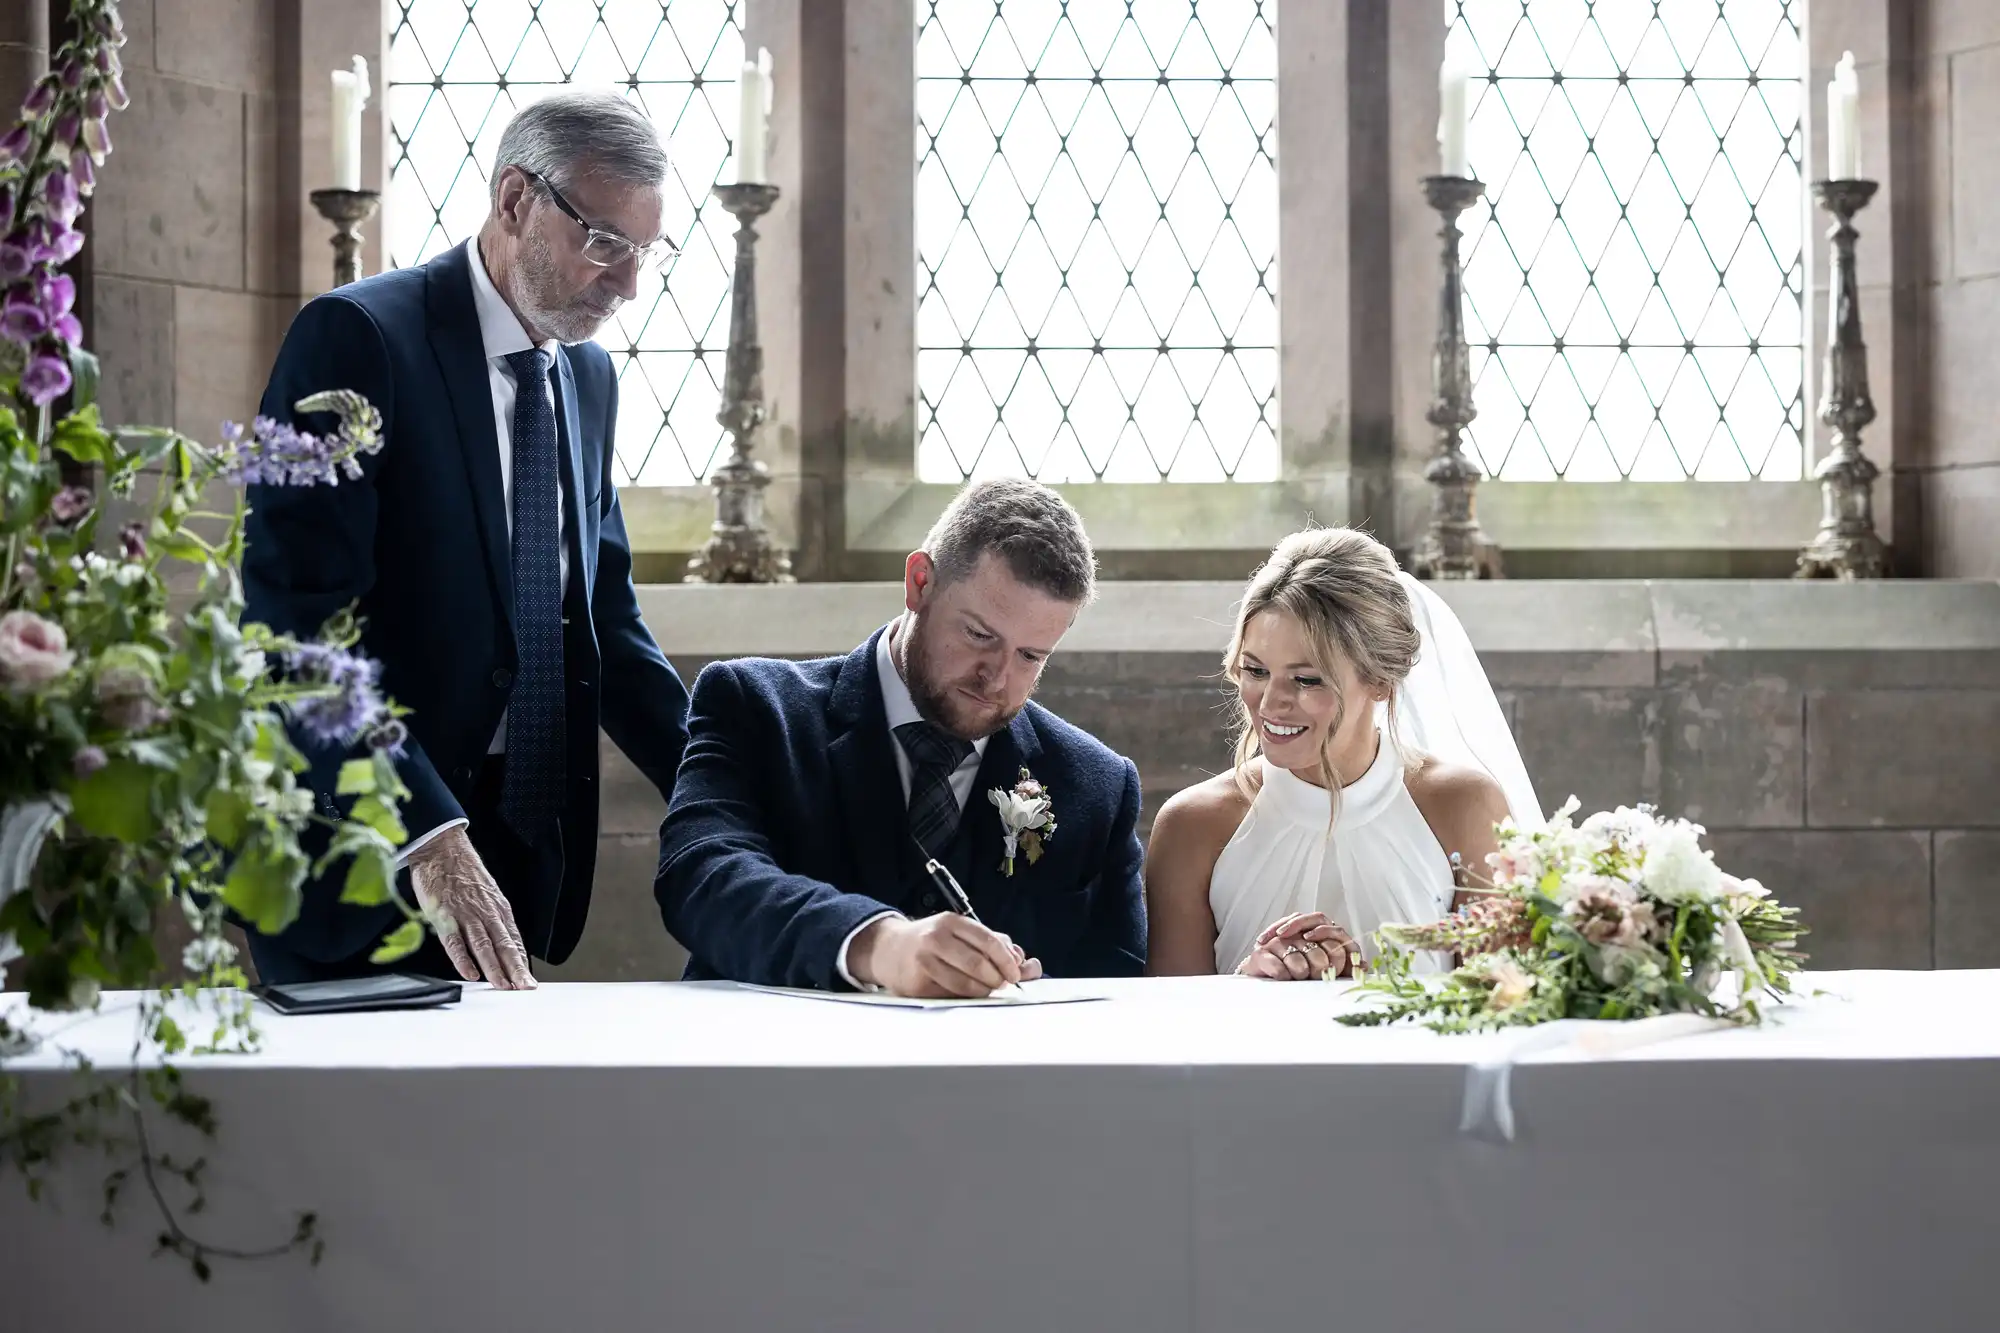 A bride and groom smiling as the groom signs a document at a wedding ceremony table, with an officiant standing next to them in a historic building with stained glass windows.